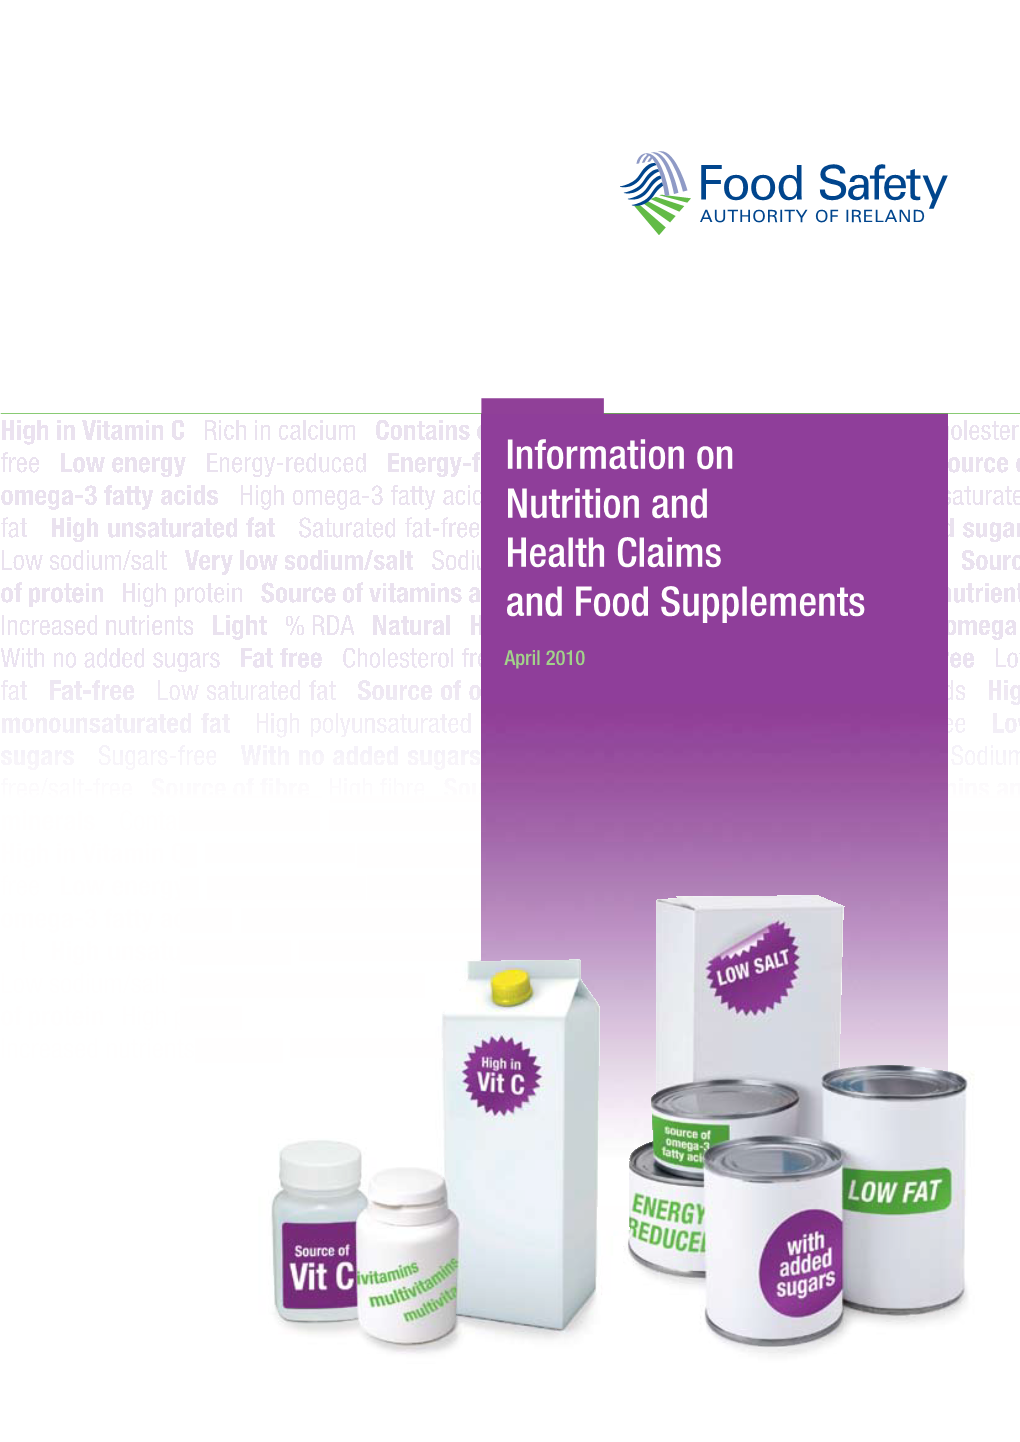 Information on Nutrition and Health Claims and Food Supplements